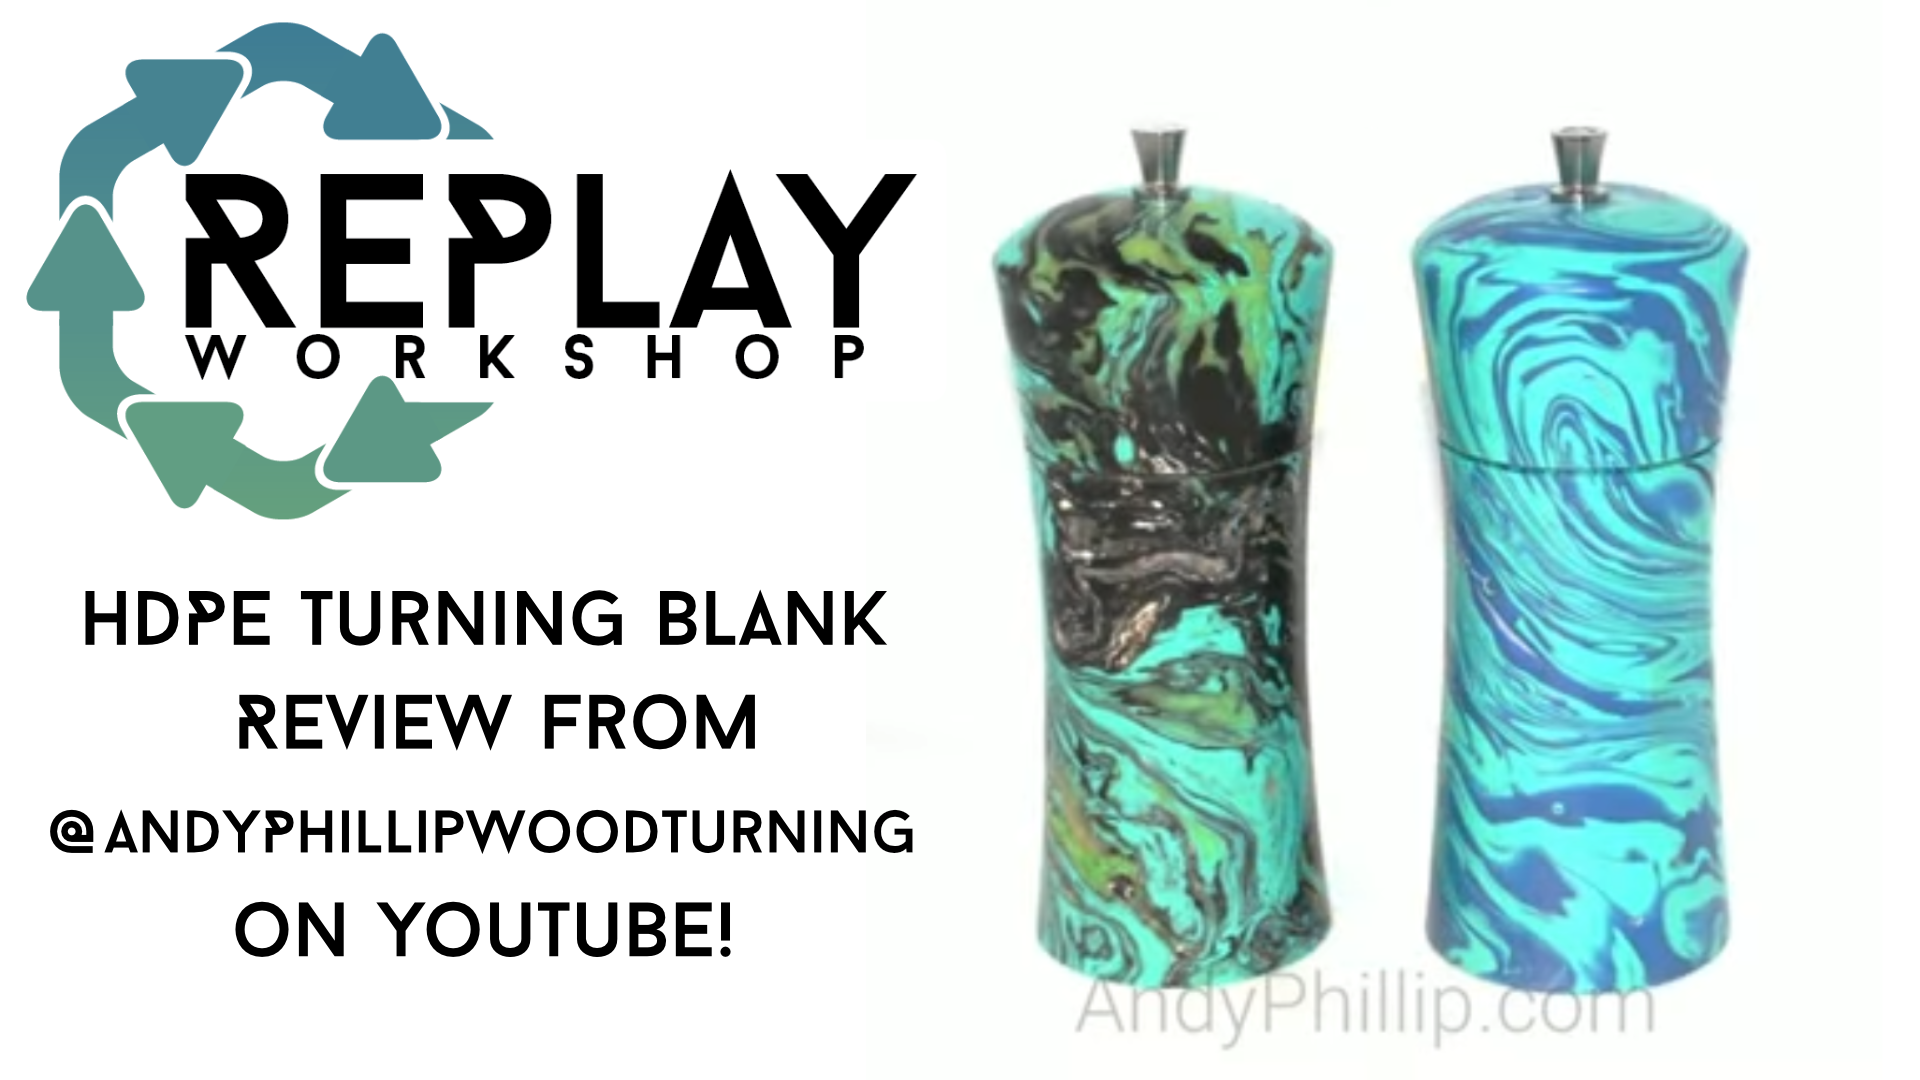 Replay Workshop Turning Blanks Review